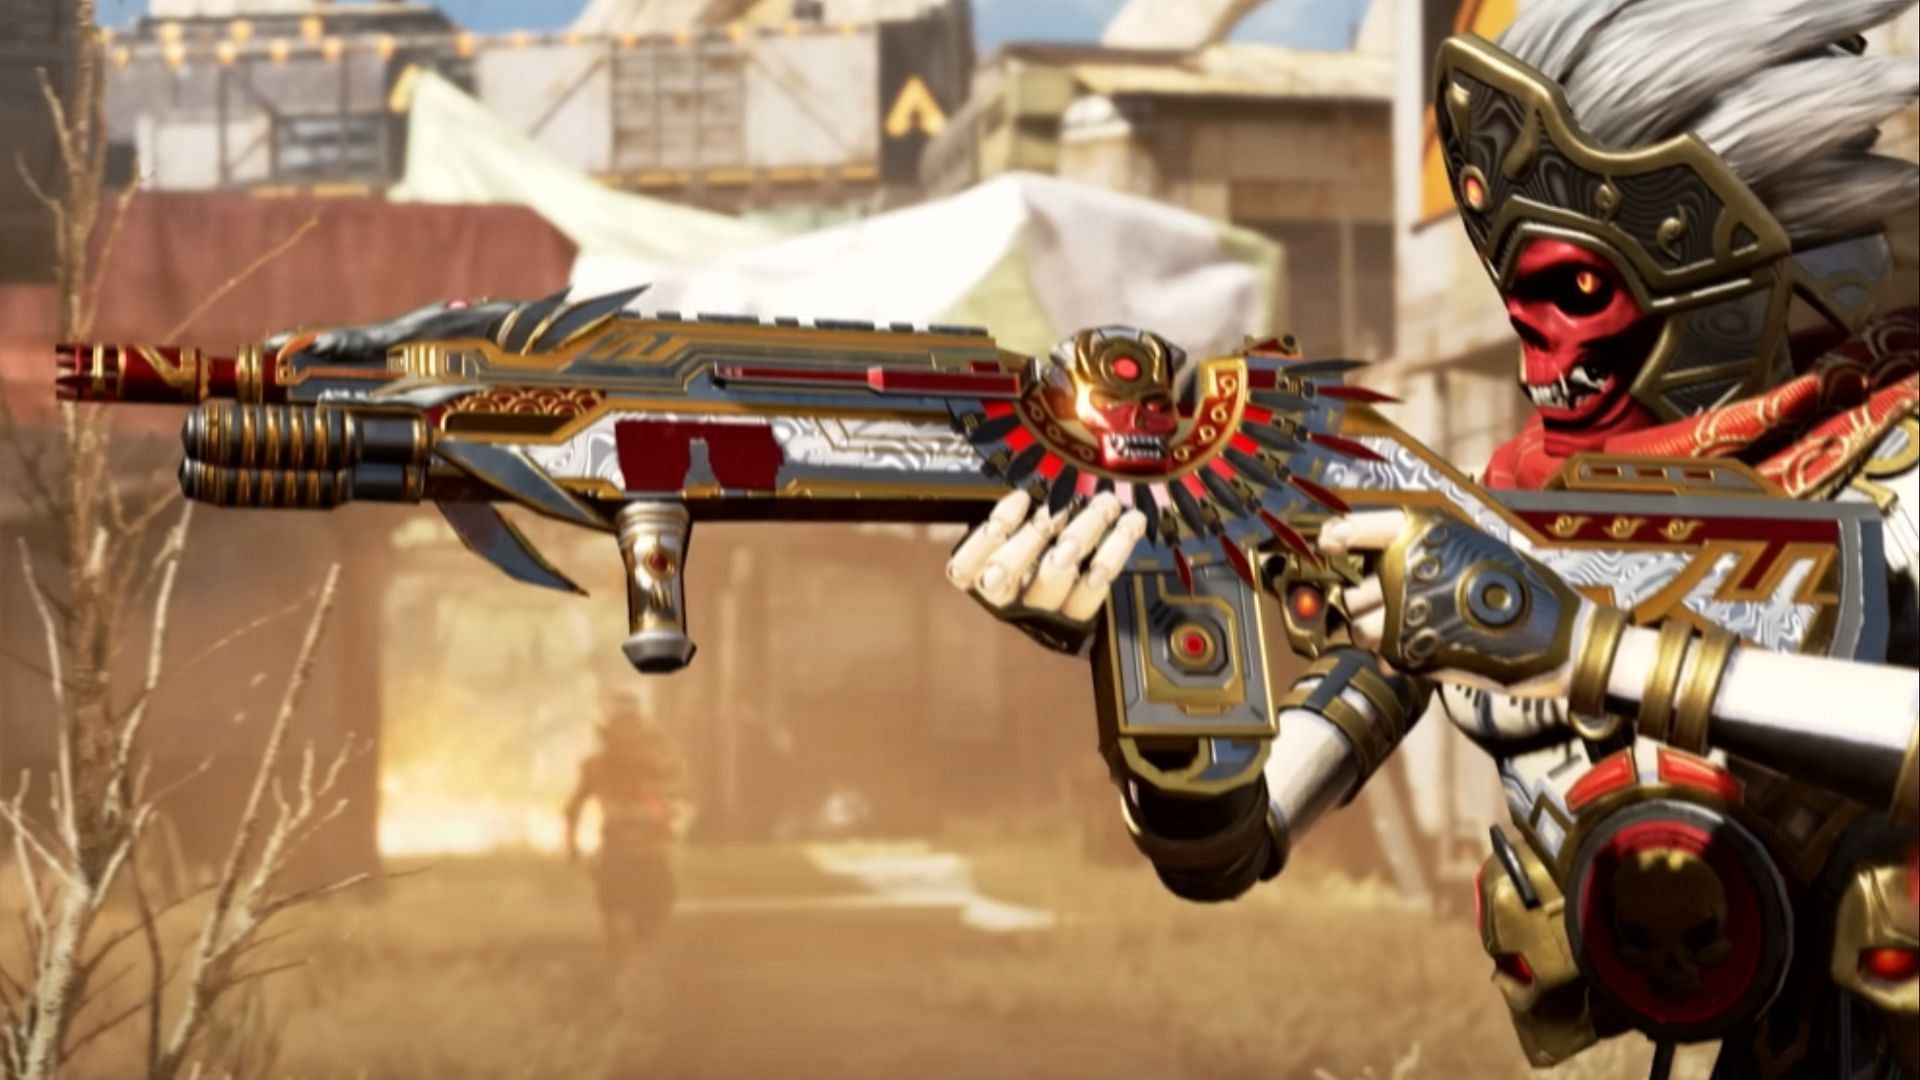 The G7 Scout weapon skin in Imperial Guard Collection Event (Image via EA)